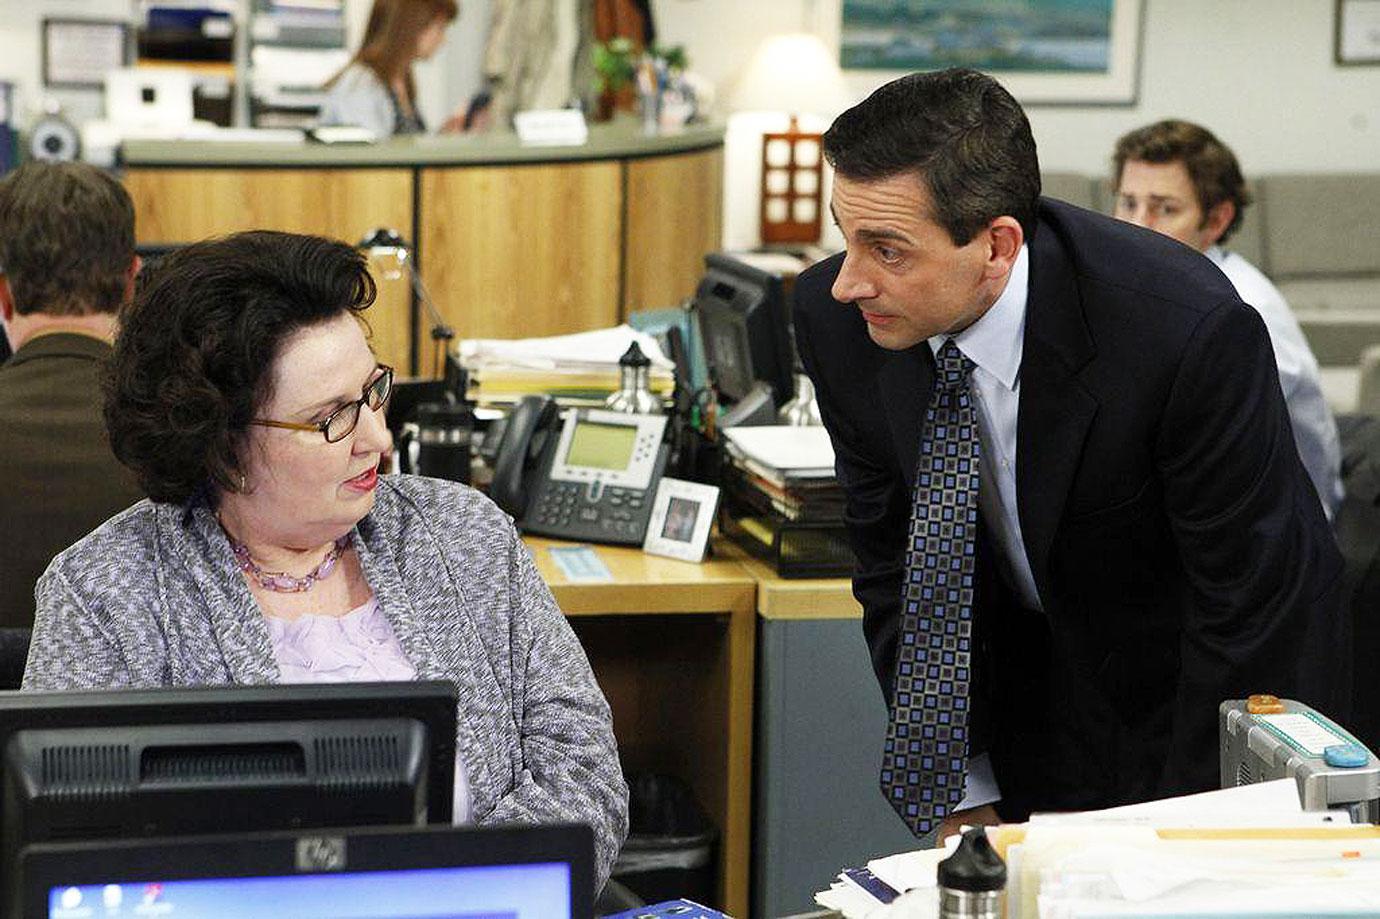 The Office' Could Be Getting A Reboot, Says NBC Content Chief